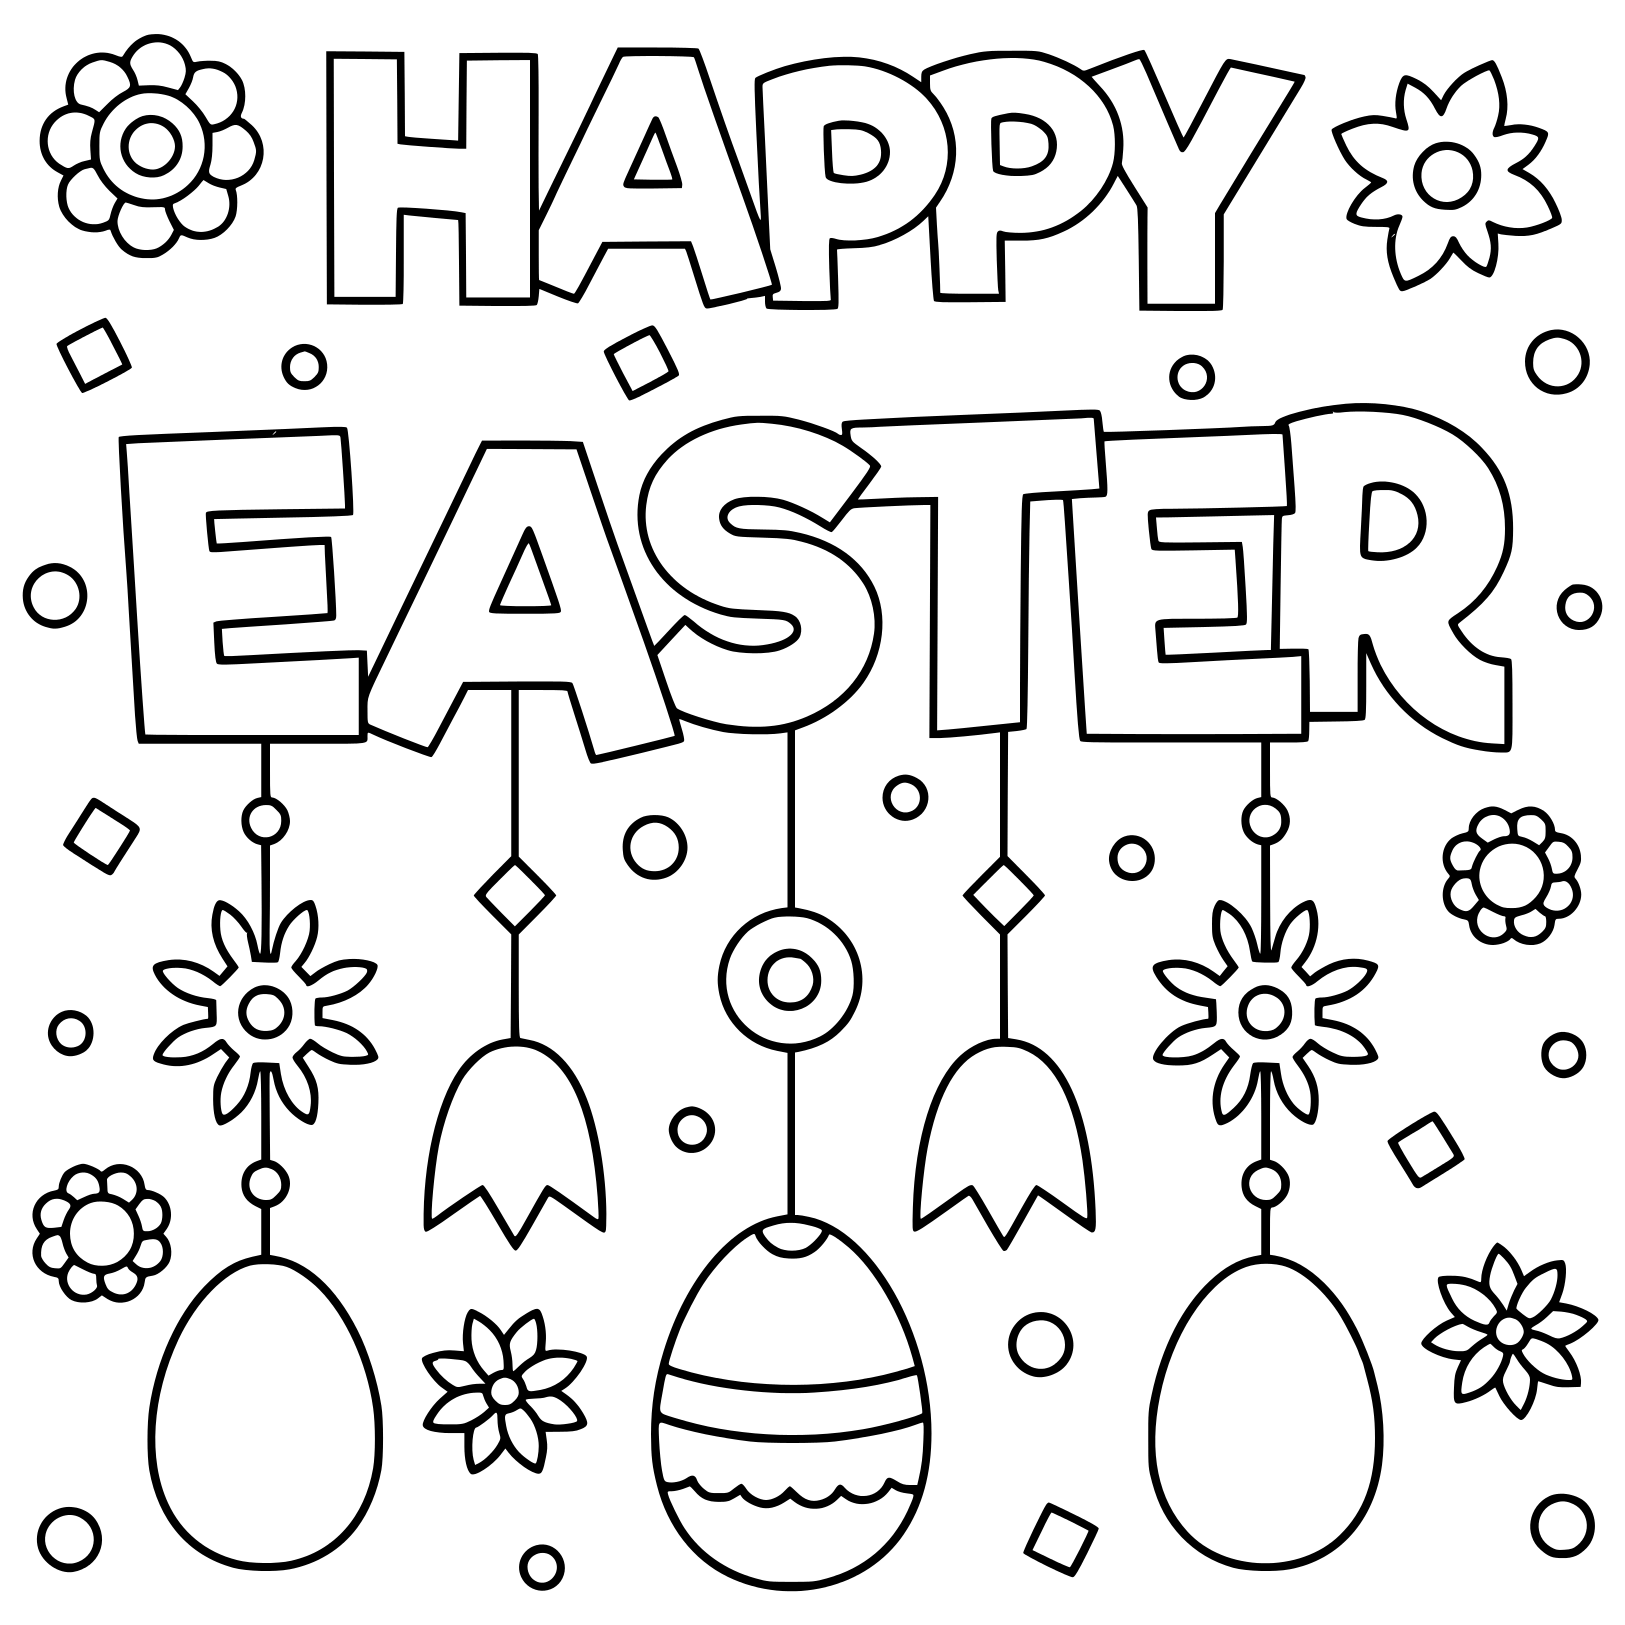 Happy Easter Egg Flowers 2019 Coloring Page